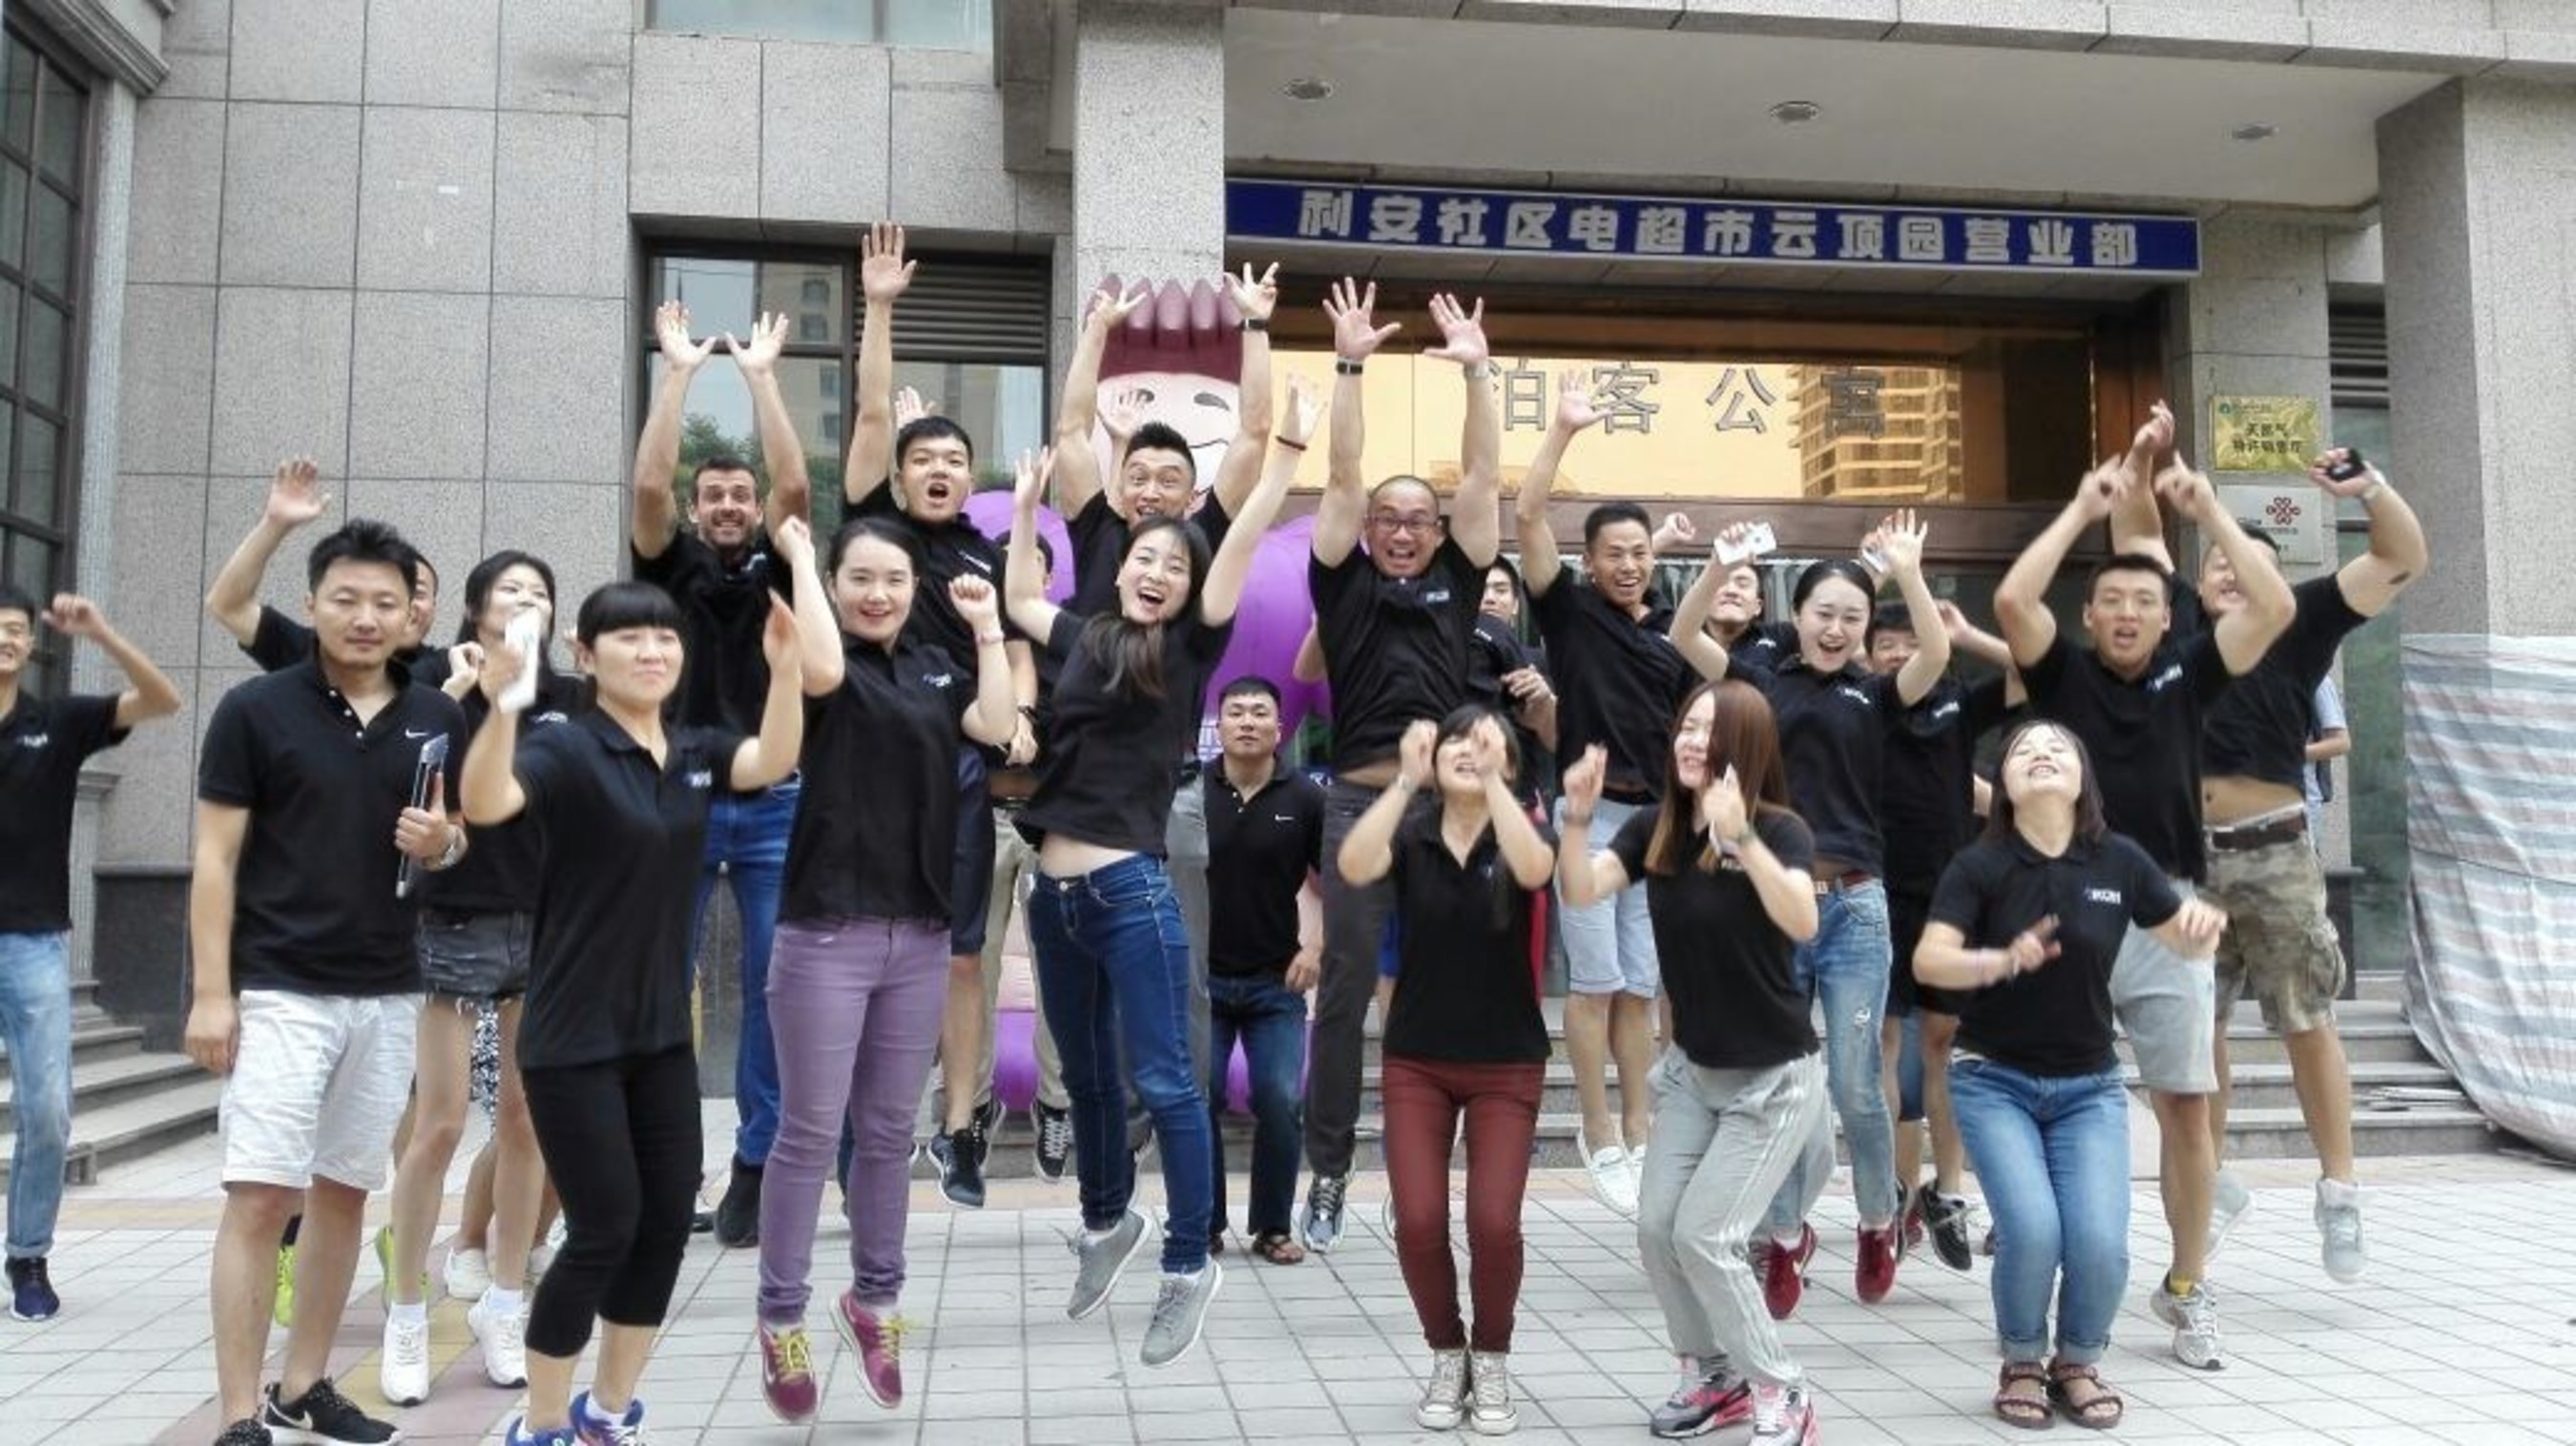 An Anytime Fitness gym will soon open in Shaanxi Province, China